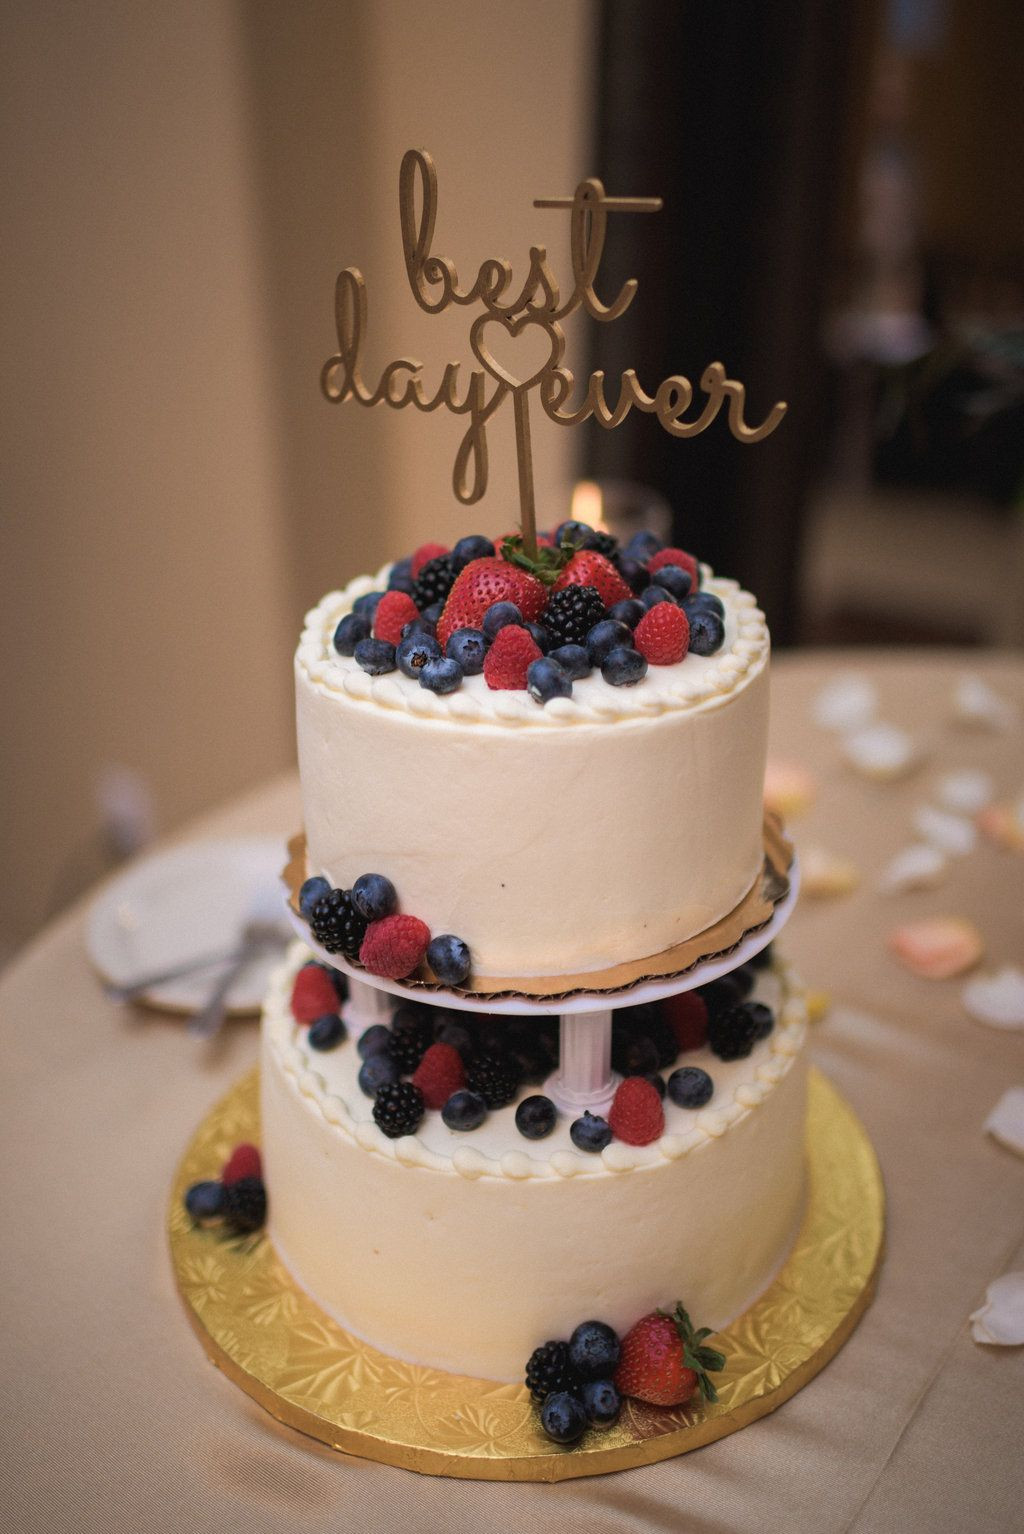 Wedding Cakes whole Foods the Best whole Foods Berry Chantilly Wedding Cake